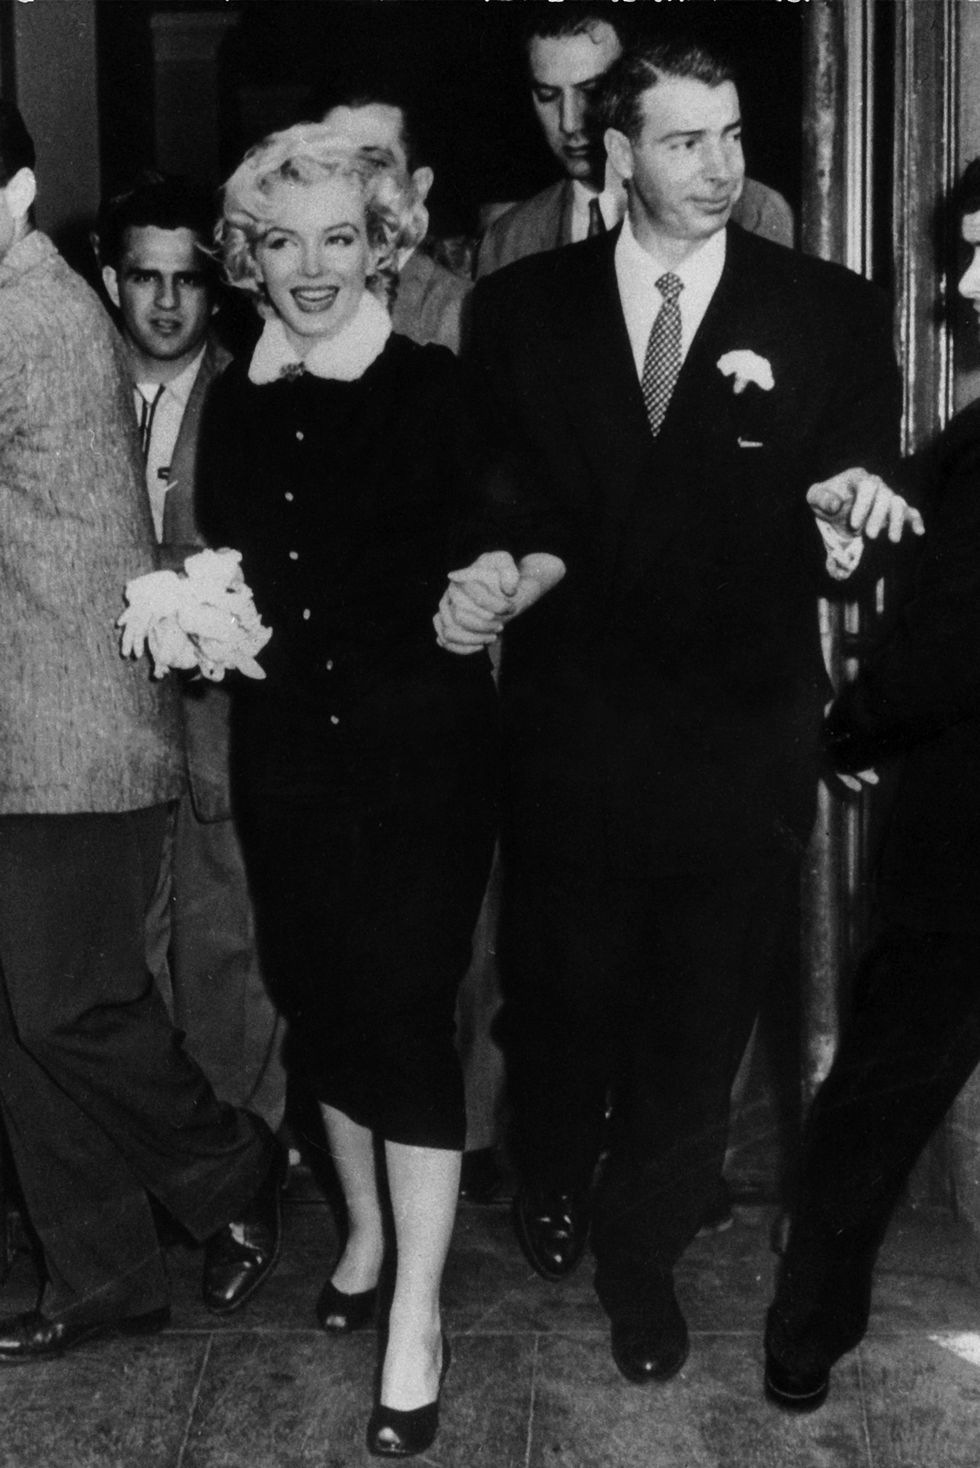 the american actress marilyn monroe and her husband joe dimaggio leaving the town hall after their wedding san francisco, 14th january 1954 photo by mondadori via getty images